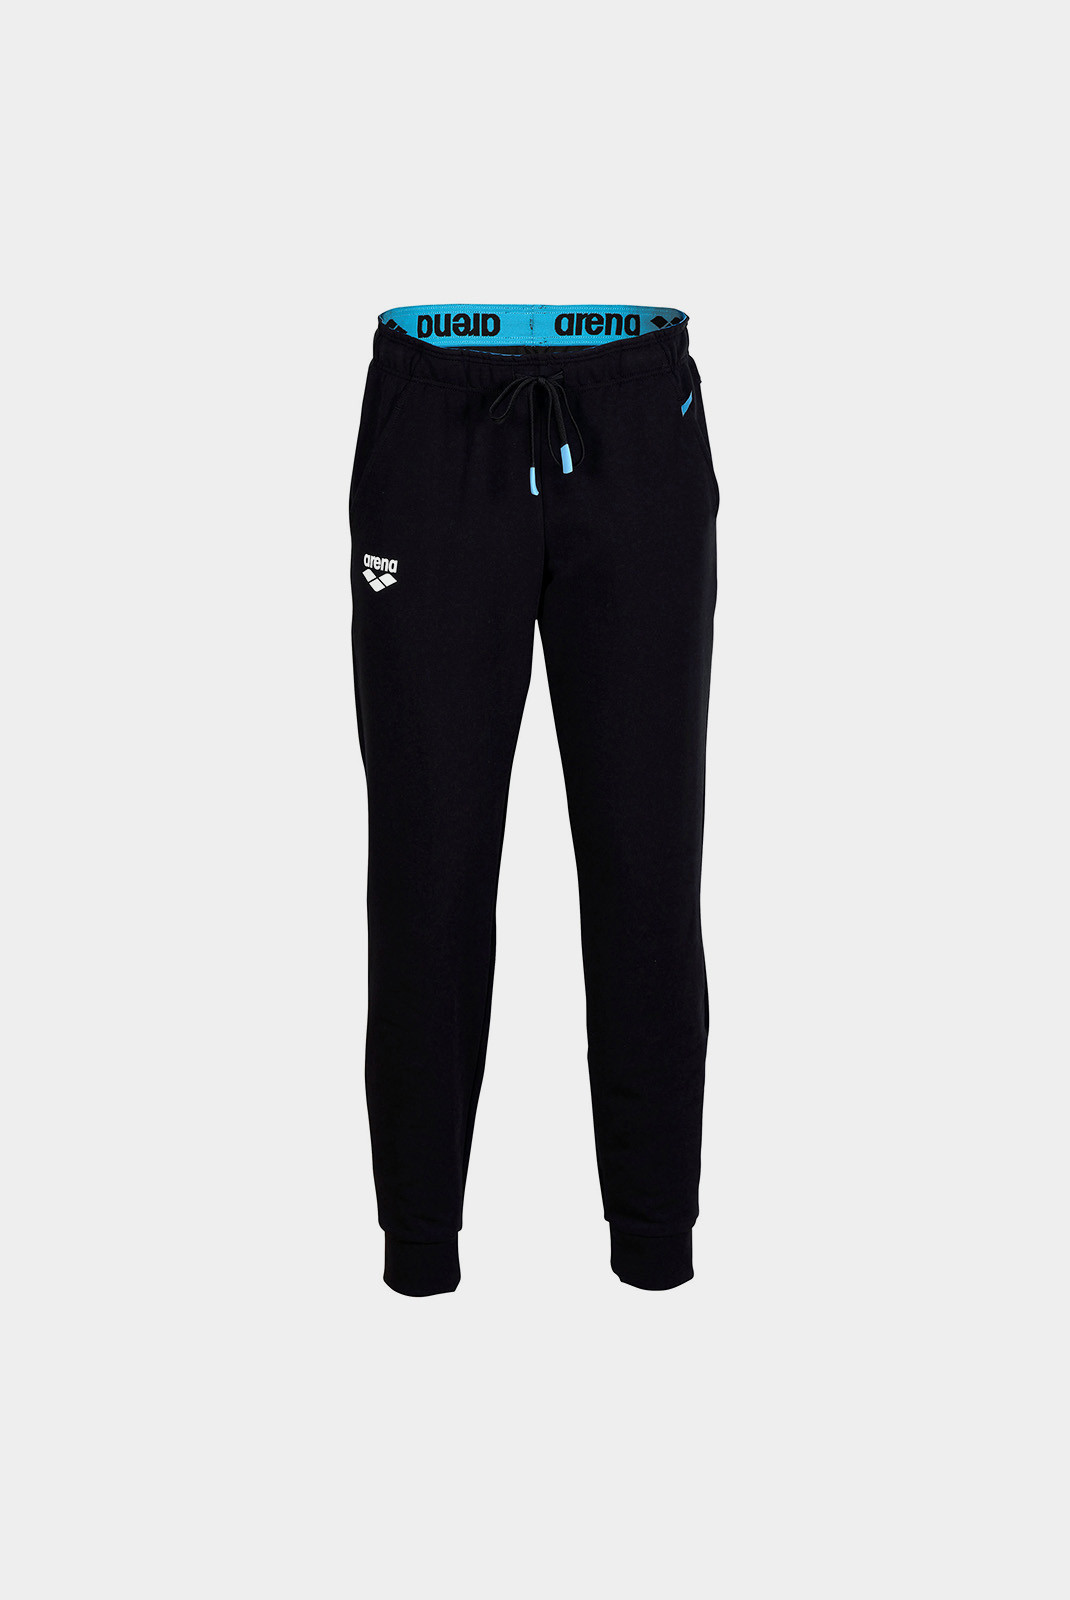 Штани Arena TEAM PANT SOLID 004898-500